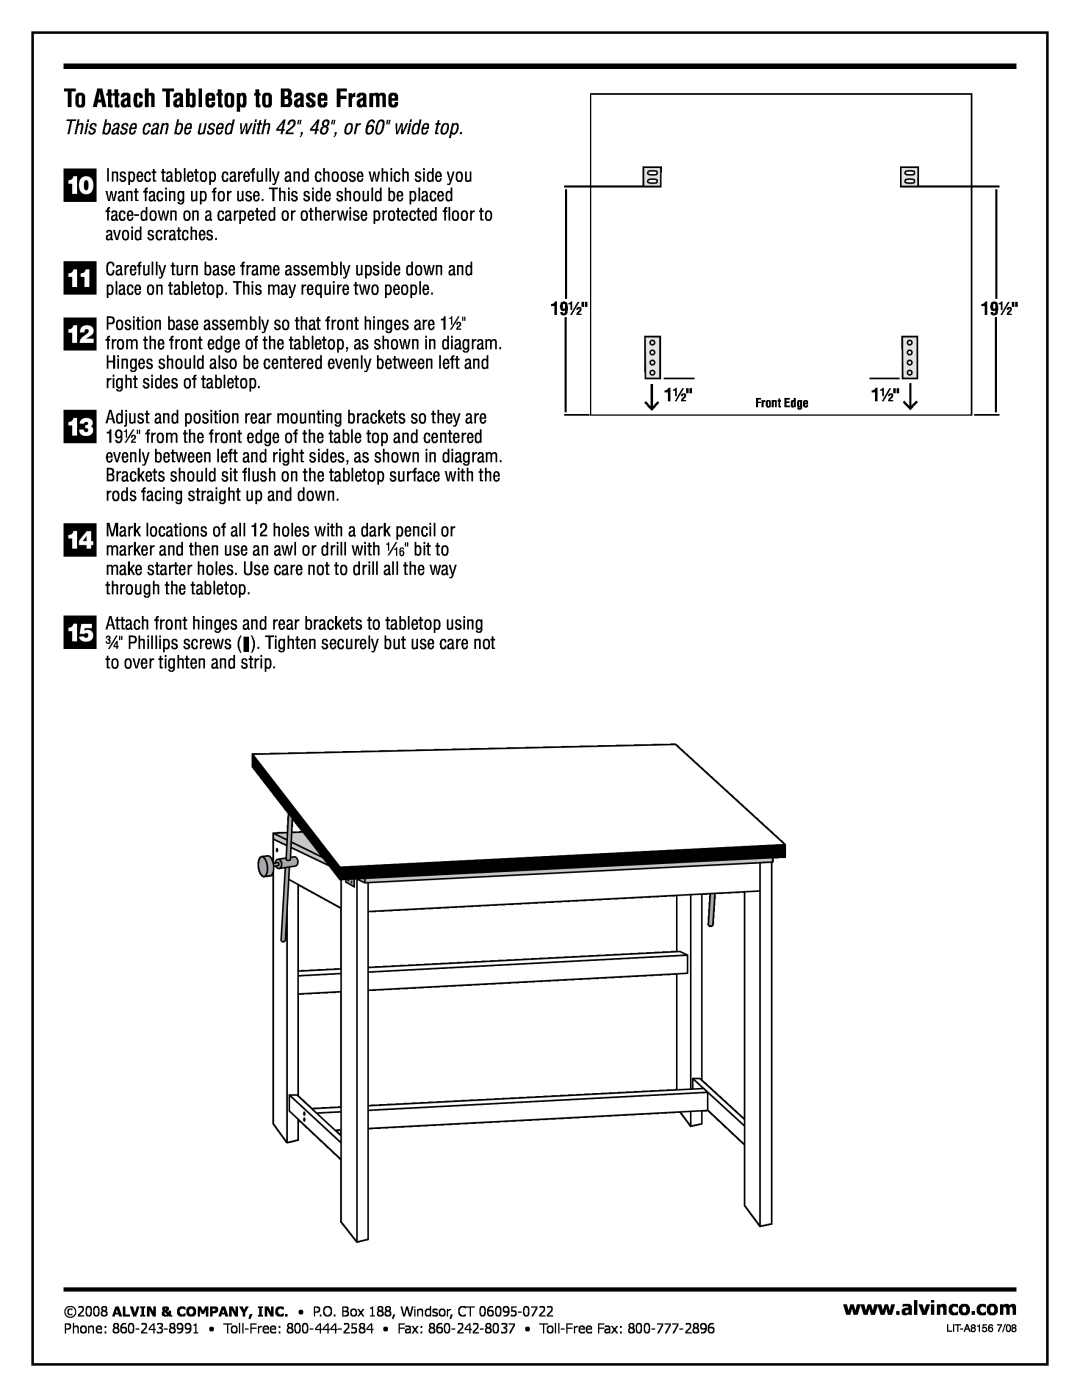 Alvin WTB60, WTB48-WA, WTB42-WA manual To Attach Tabletop to Base Frame, This base can be used with 42, 48, or 60 wide top 